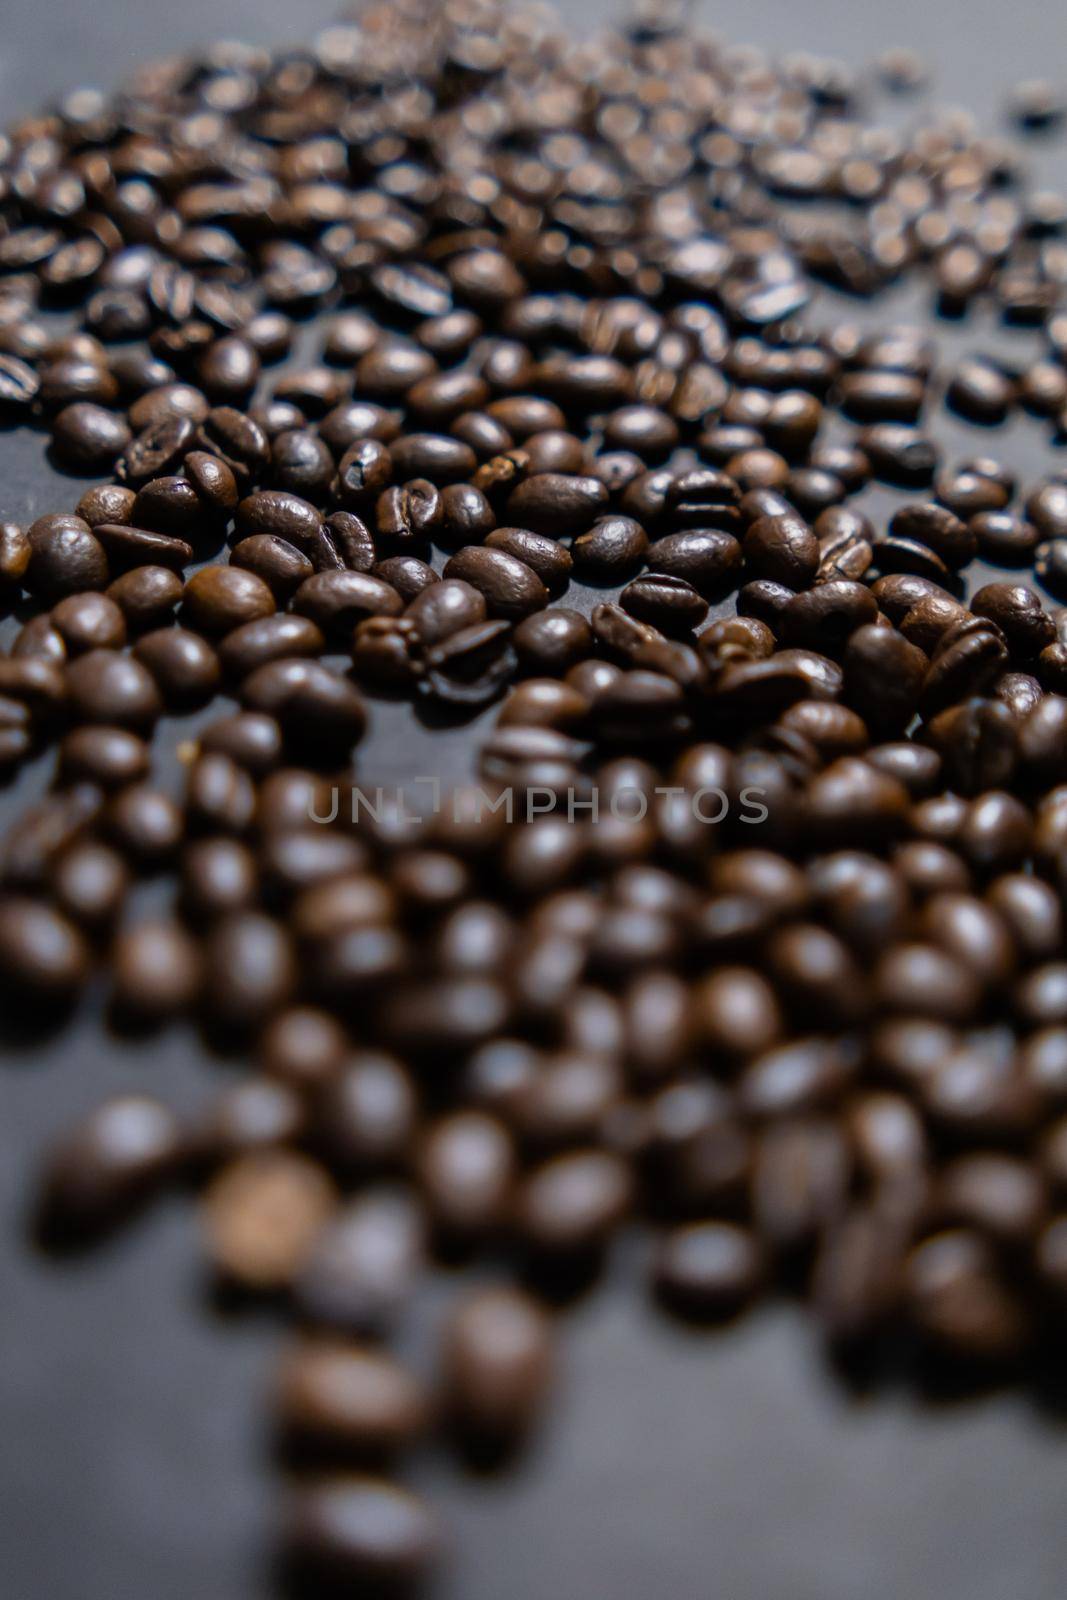 Pile of roasted coffee beans on dark gray surface by Kanelbulle